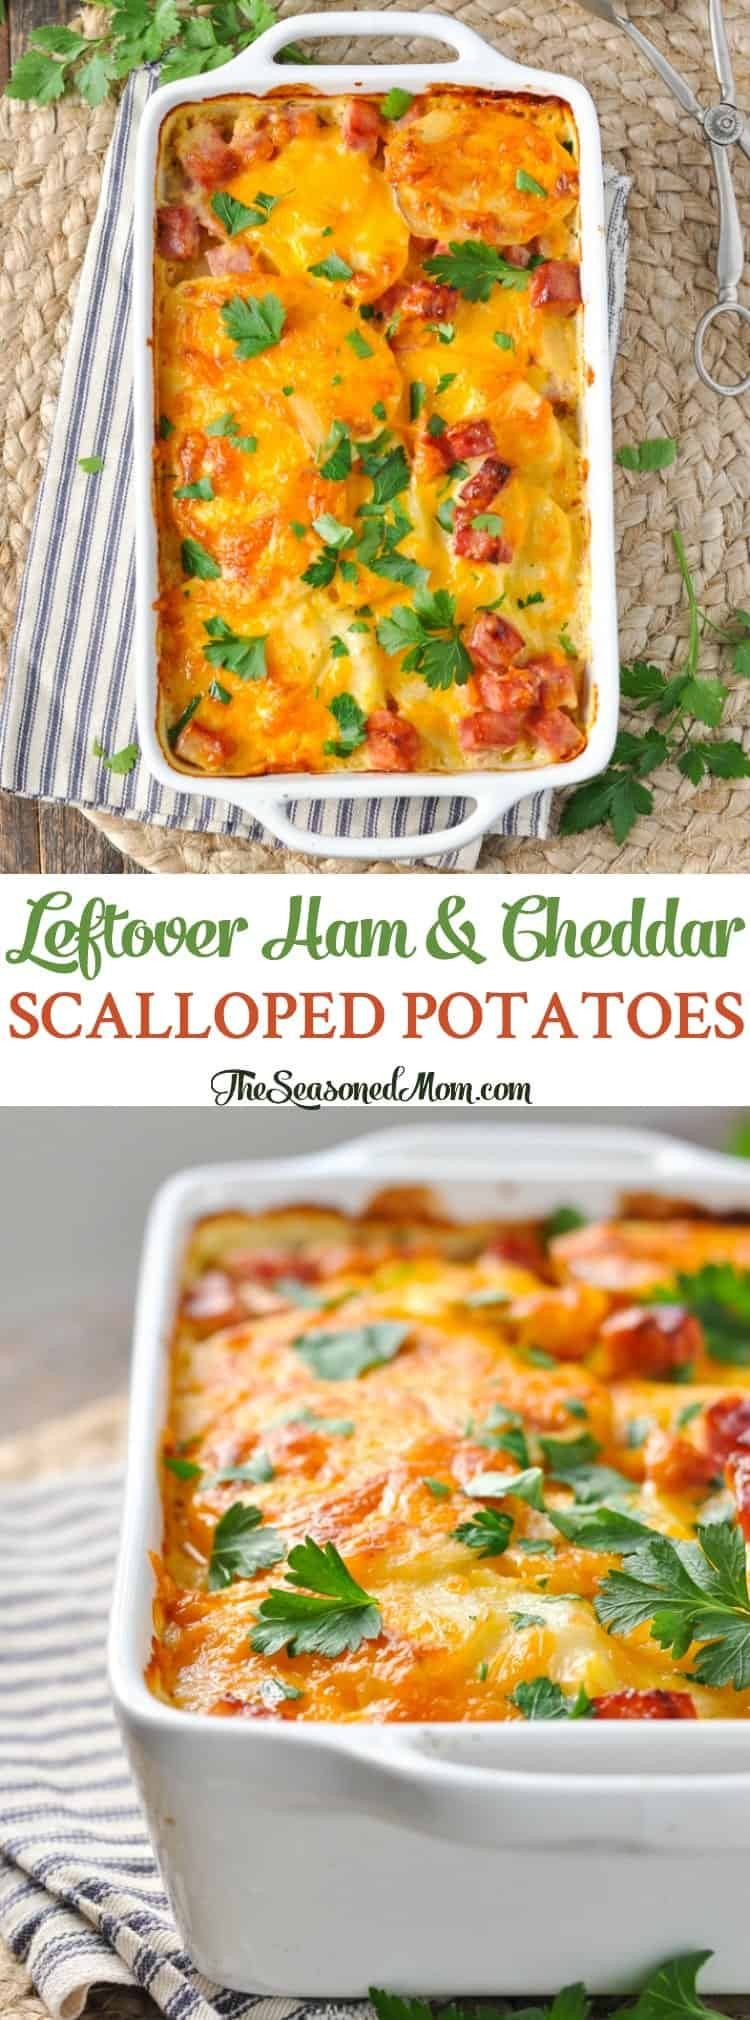 Side Dishes For Ham Dinner Recipes
 Leftover Ham and Cheddar Scalloped Potatoes The Seasoned Mom